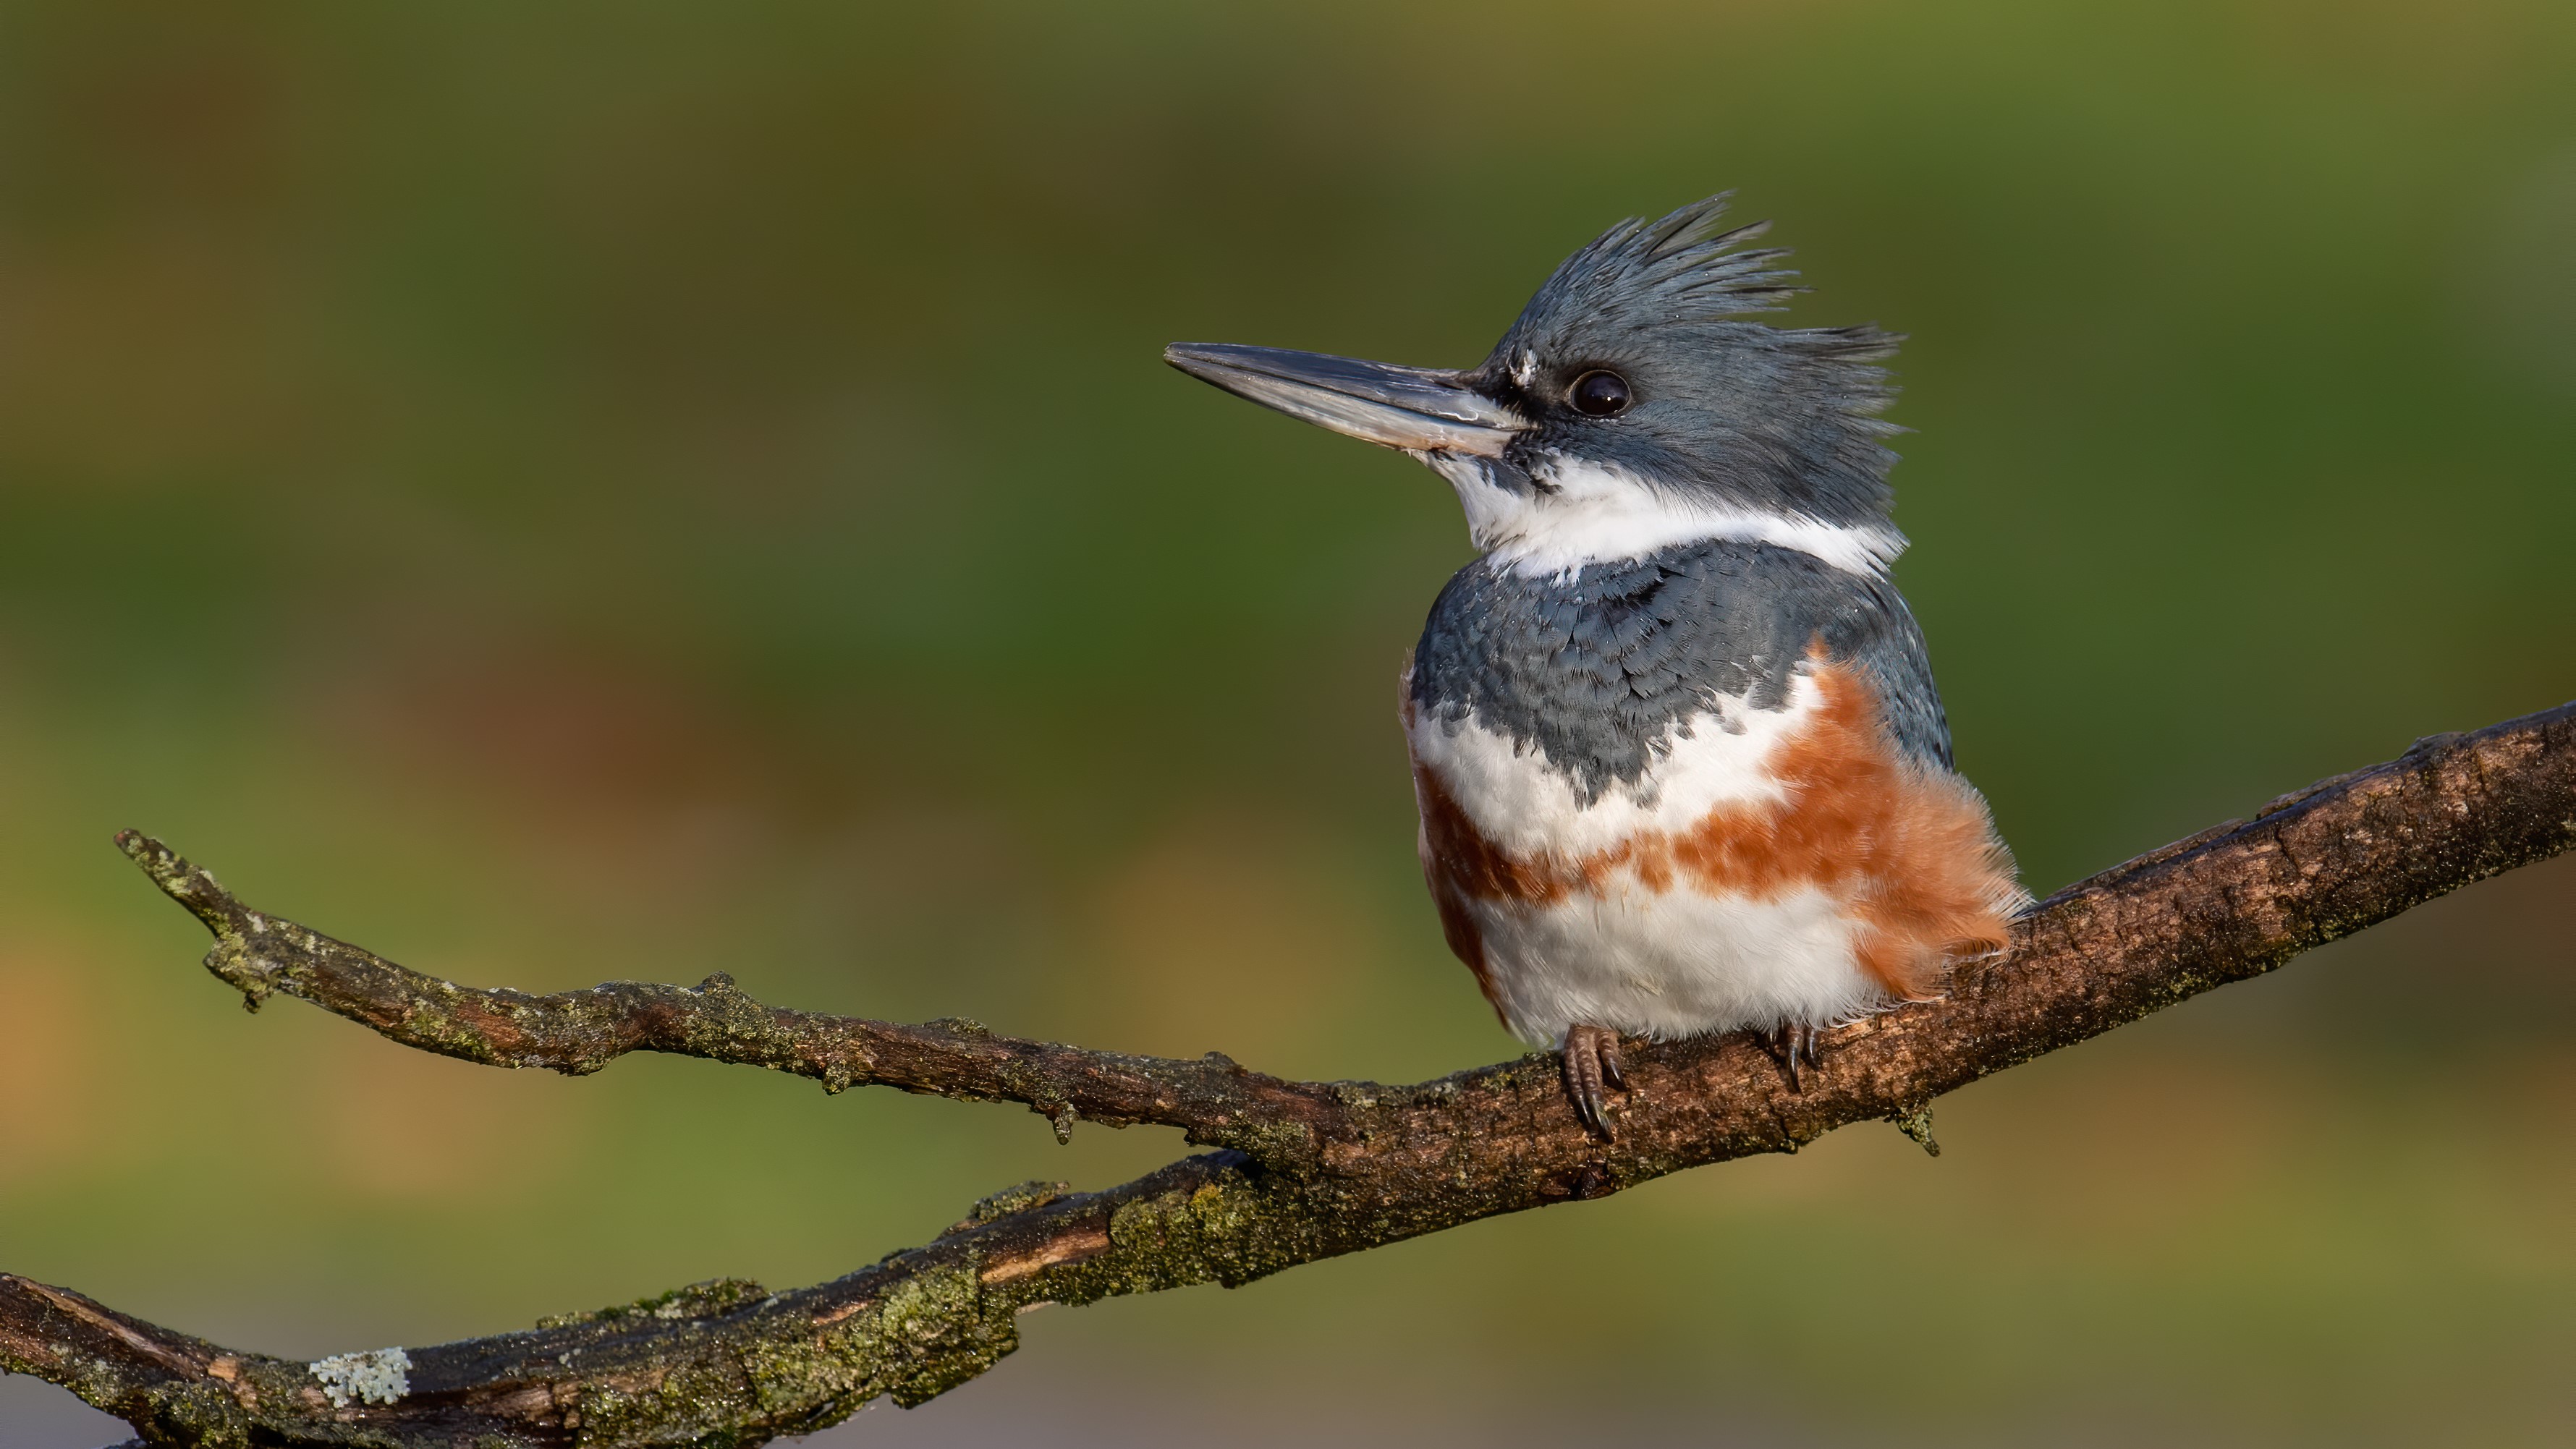 Bird report: Taking a closer look at the rarely-caught belted kingfisher